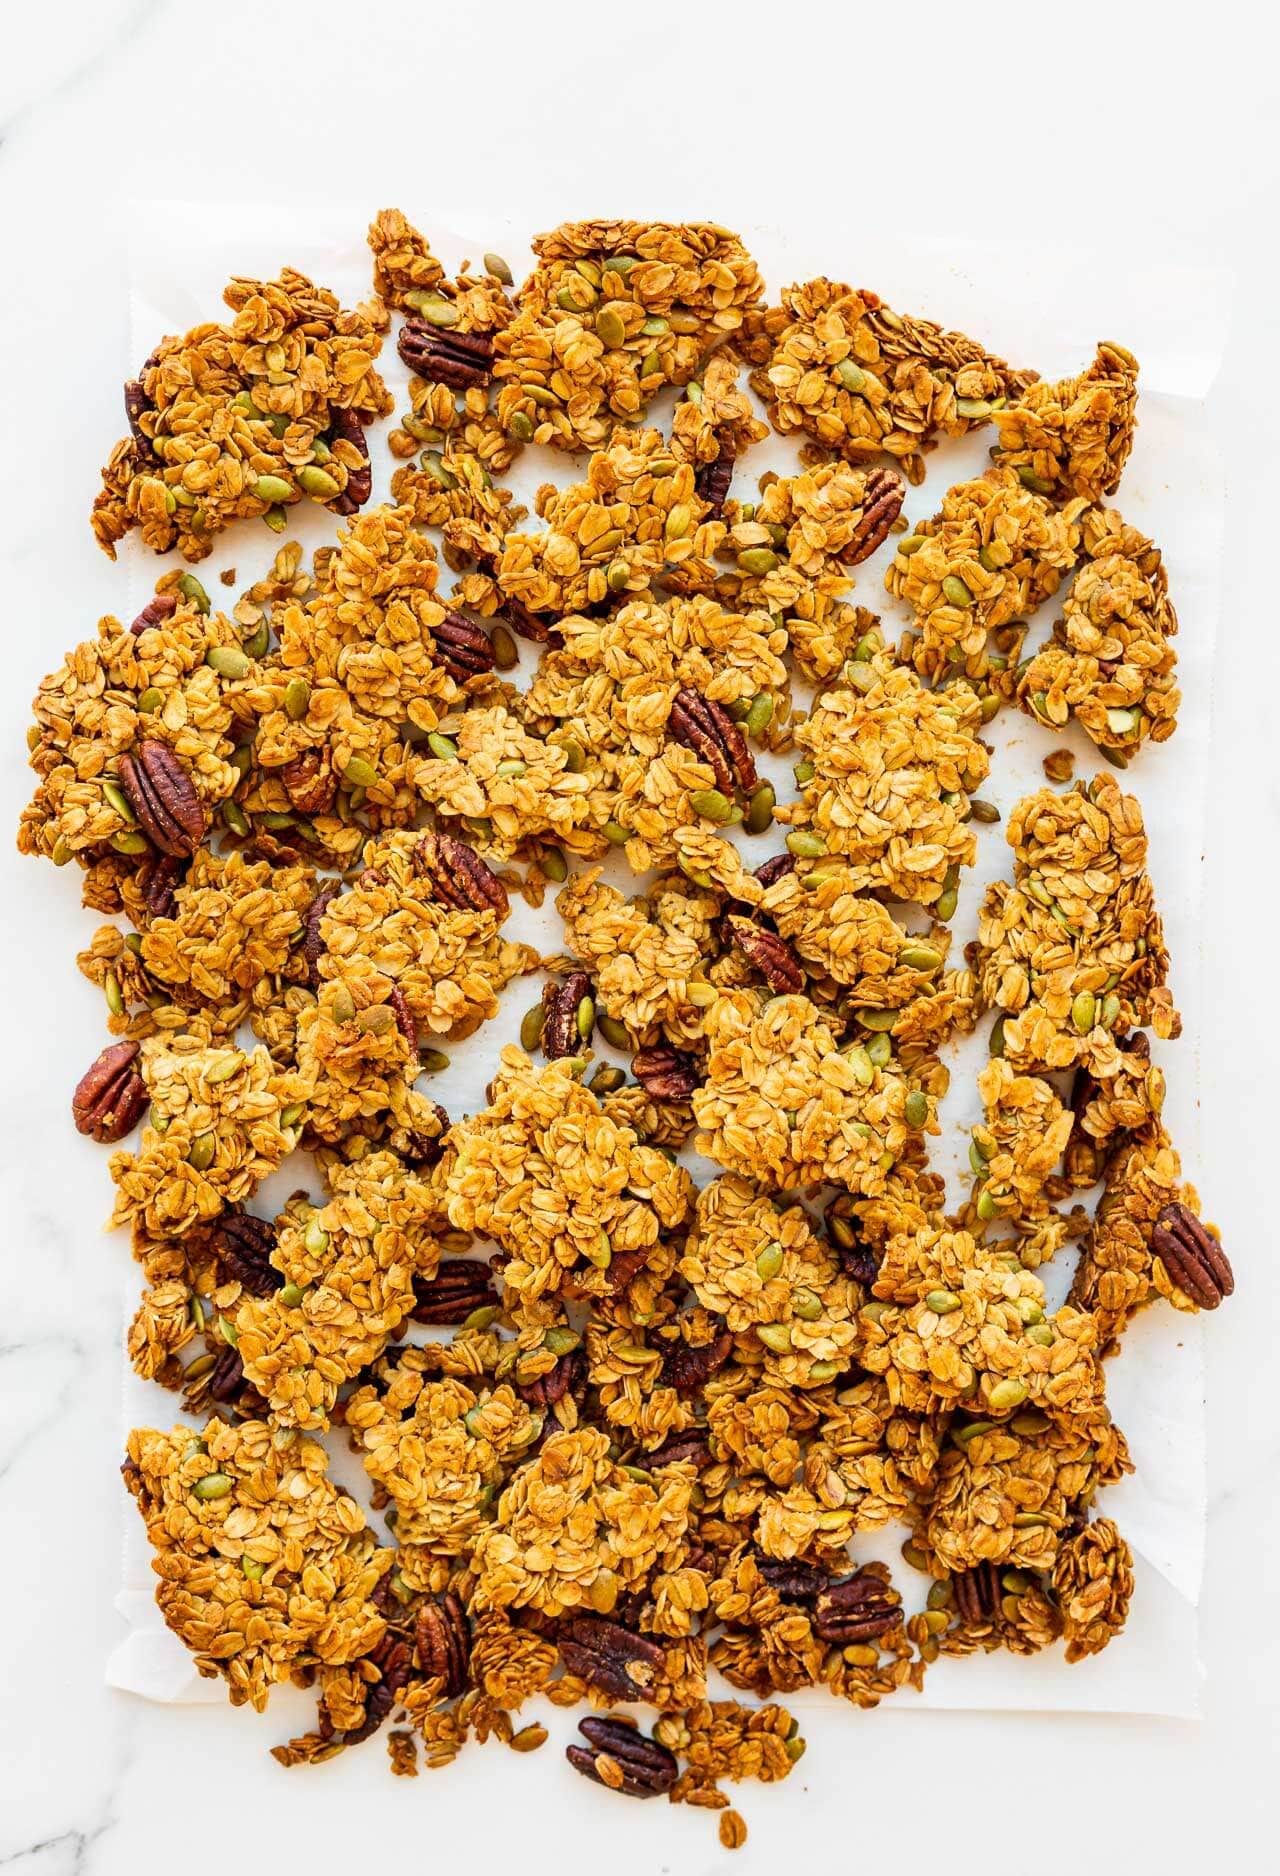 Homemade granola clusters, broken up into large chunks